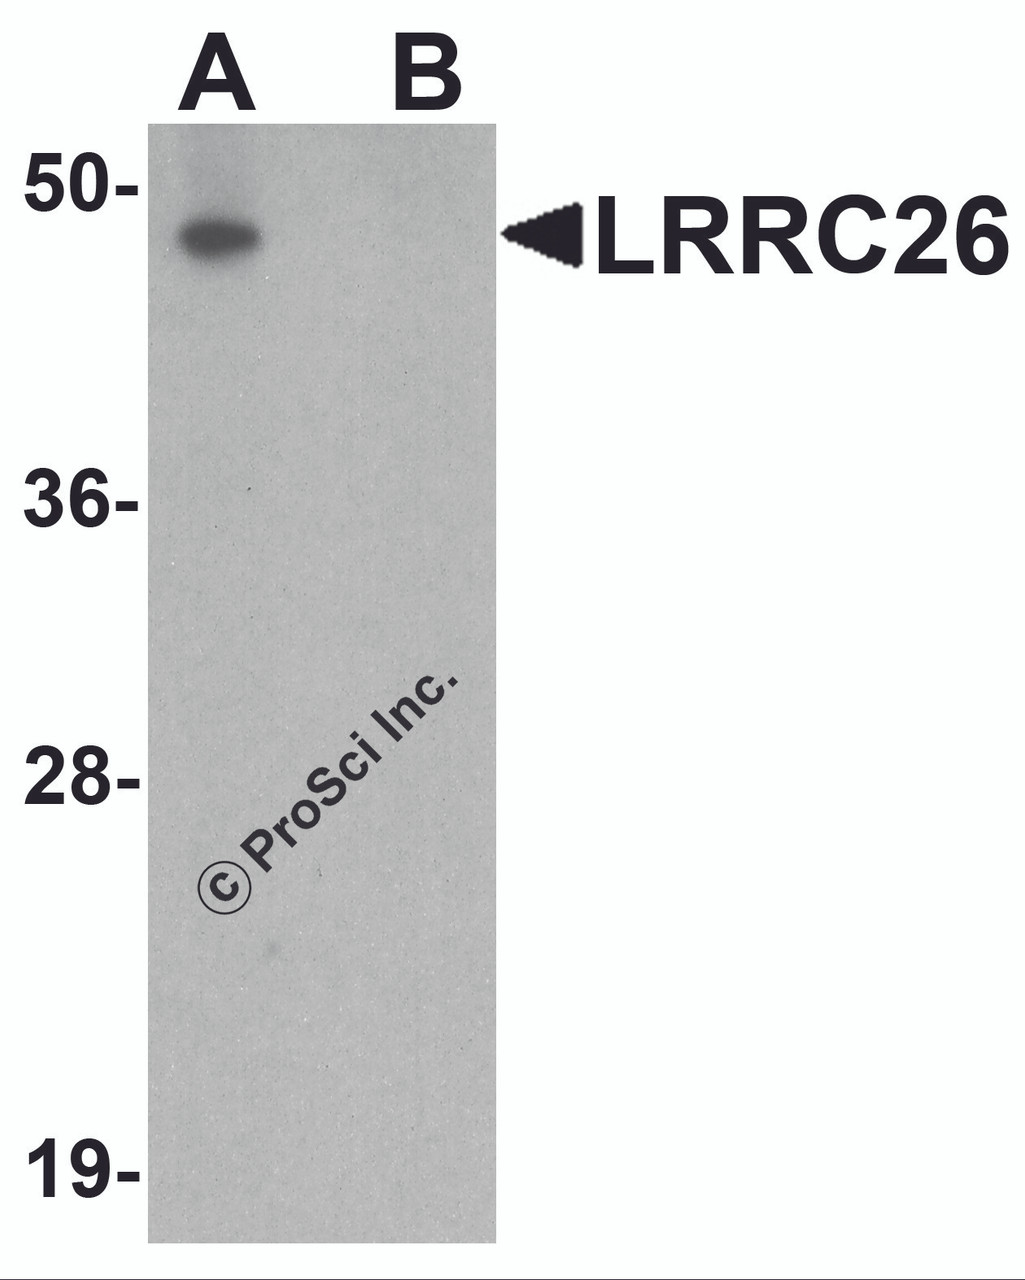 Western blot analysis of LRRC26 in human prostate tissue lysate with LRRC26 antibody at 0.5 &#956;g/ml in (A) the absence and (B) the presence of blocking peptide.